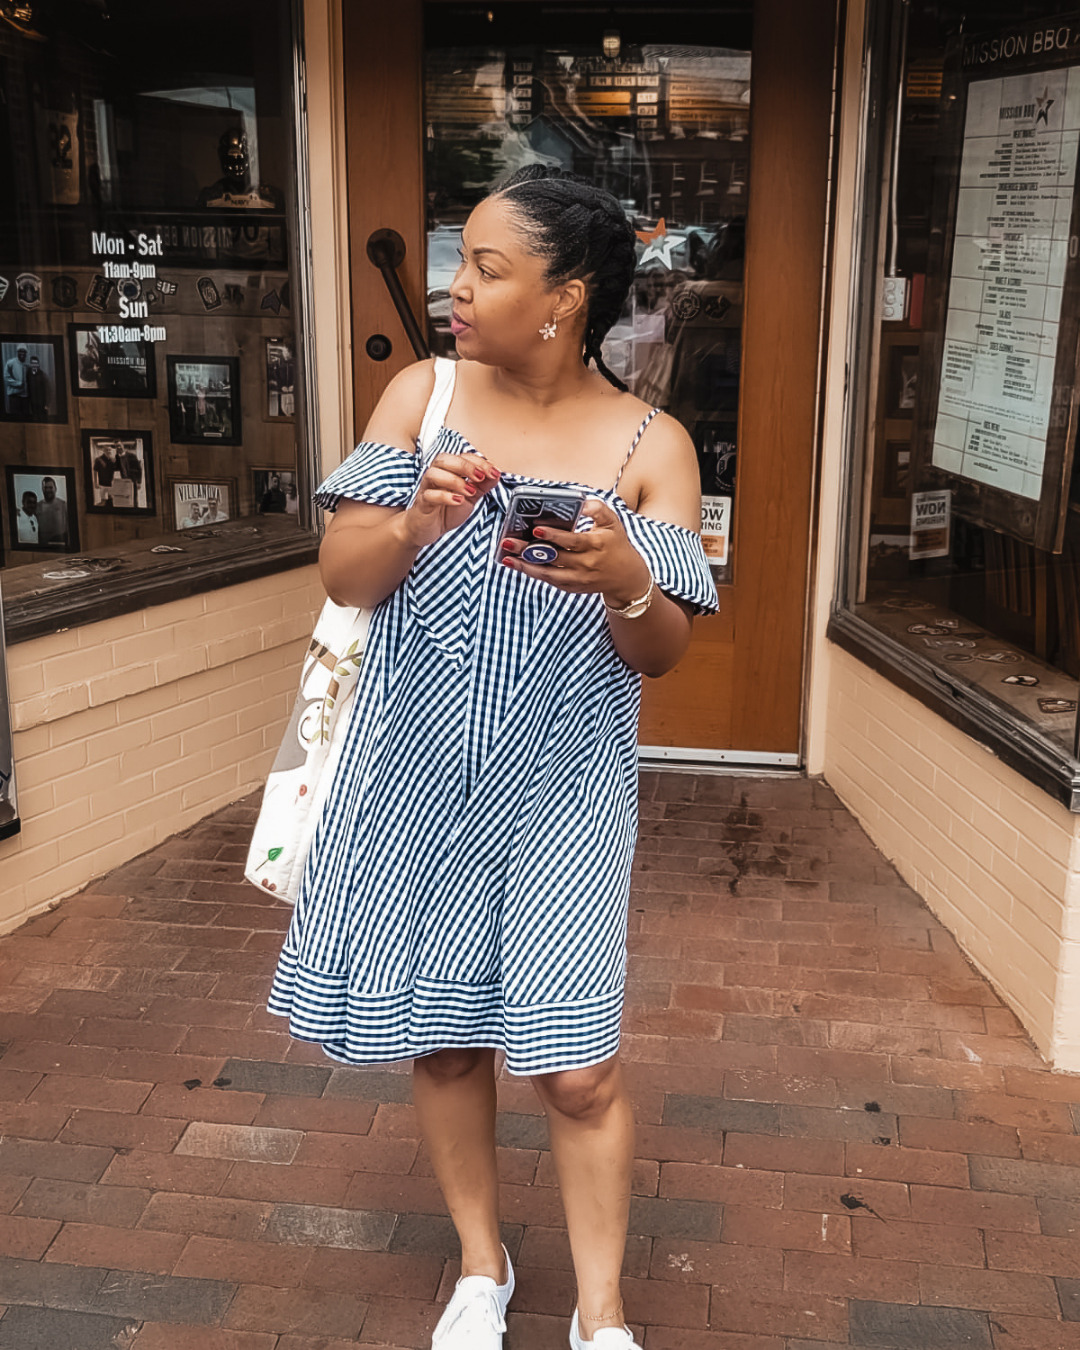 DC blogger Rogan Smith wears a blue and white babydoll dress as she stands in downtown Annapolis in Maryland